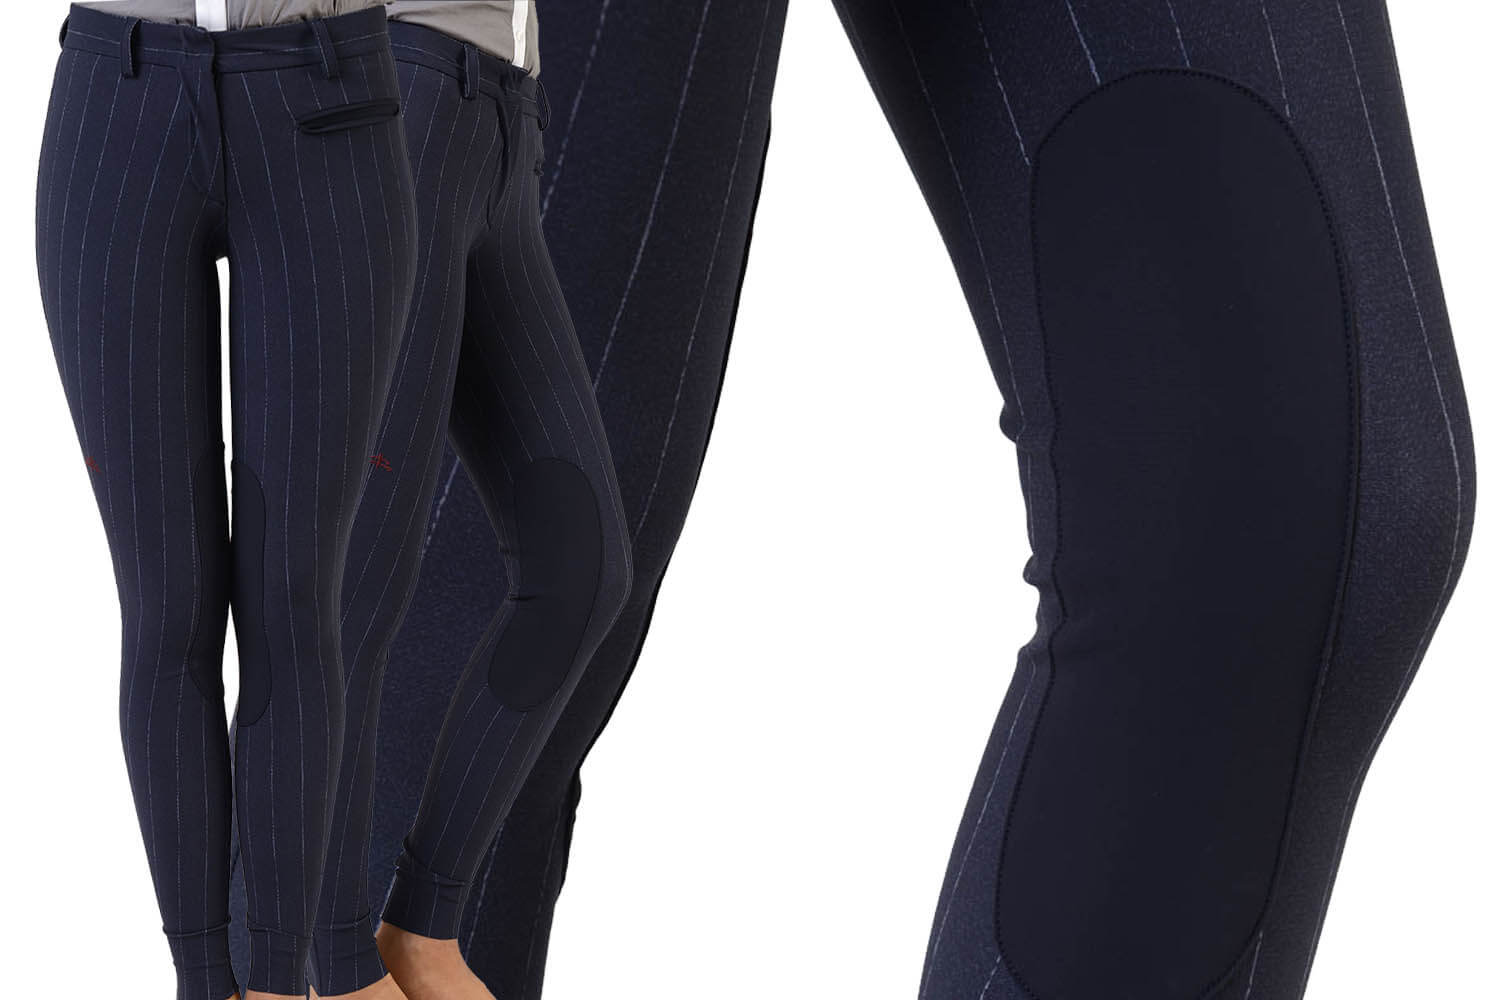 Women's riding breeches with material grip